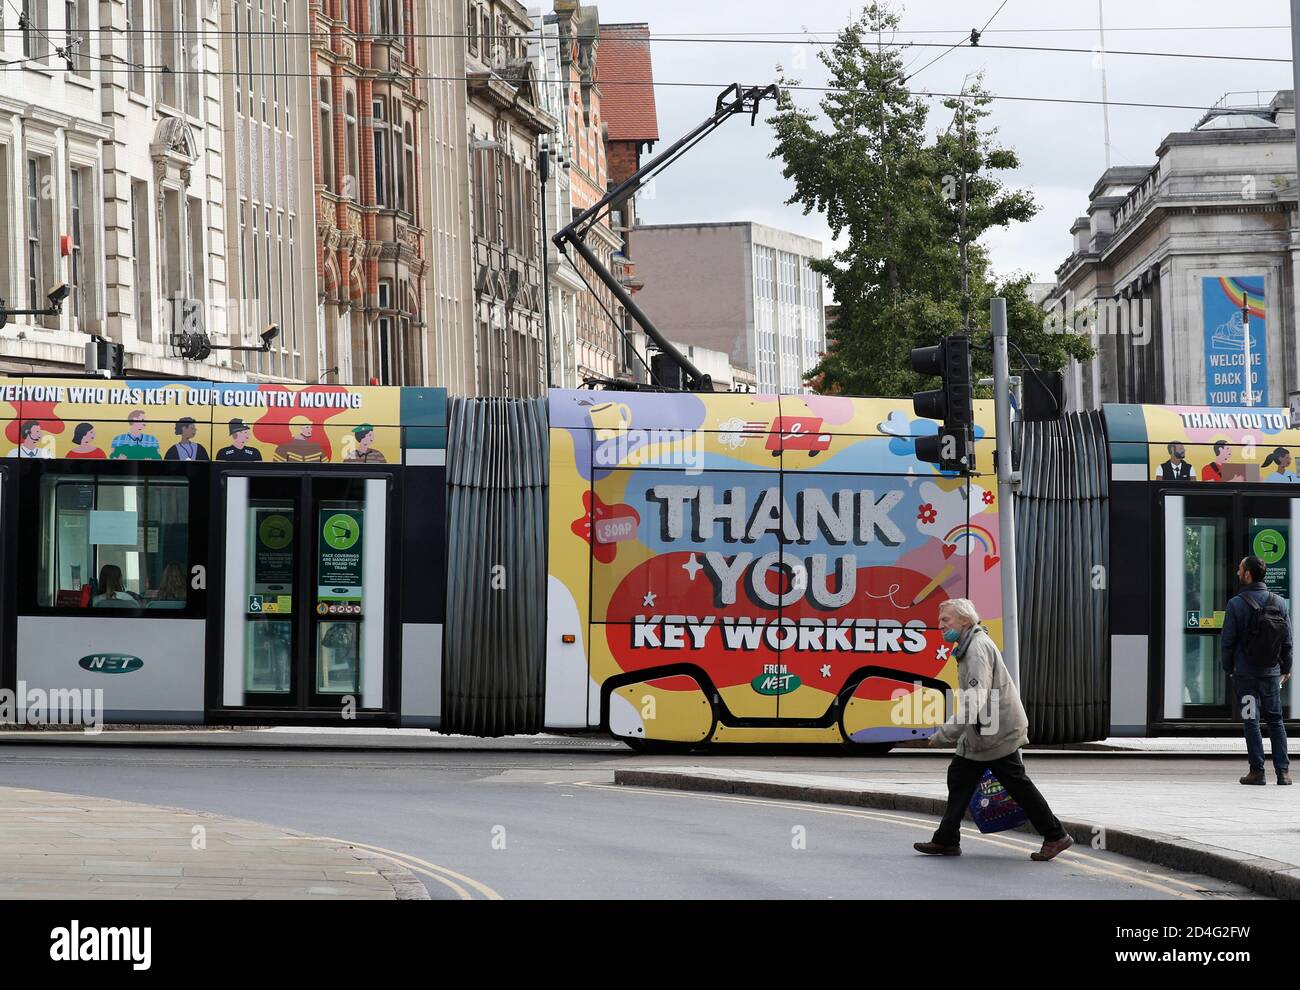 Nottingham, Nottinghamshire, UK. 9th October 2020. A tram with livery thanking key workers travels through the city centre after it was announced Nottingham has the highest Covid-19 infection rate in the UK. Credit Darren Staples/Alamy Live News. Stock Photo